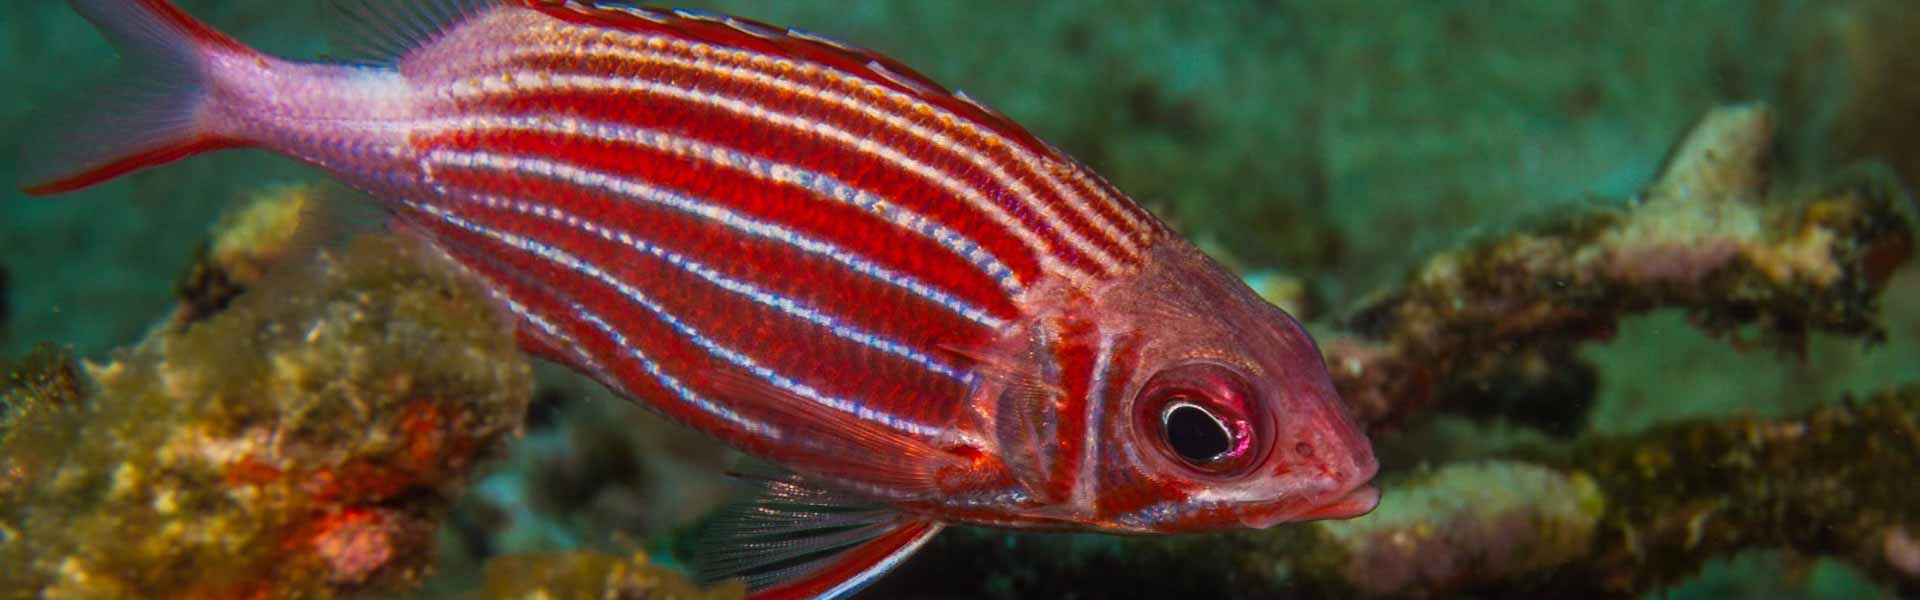 The Red Sea Squirrelfish